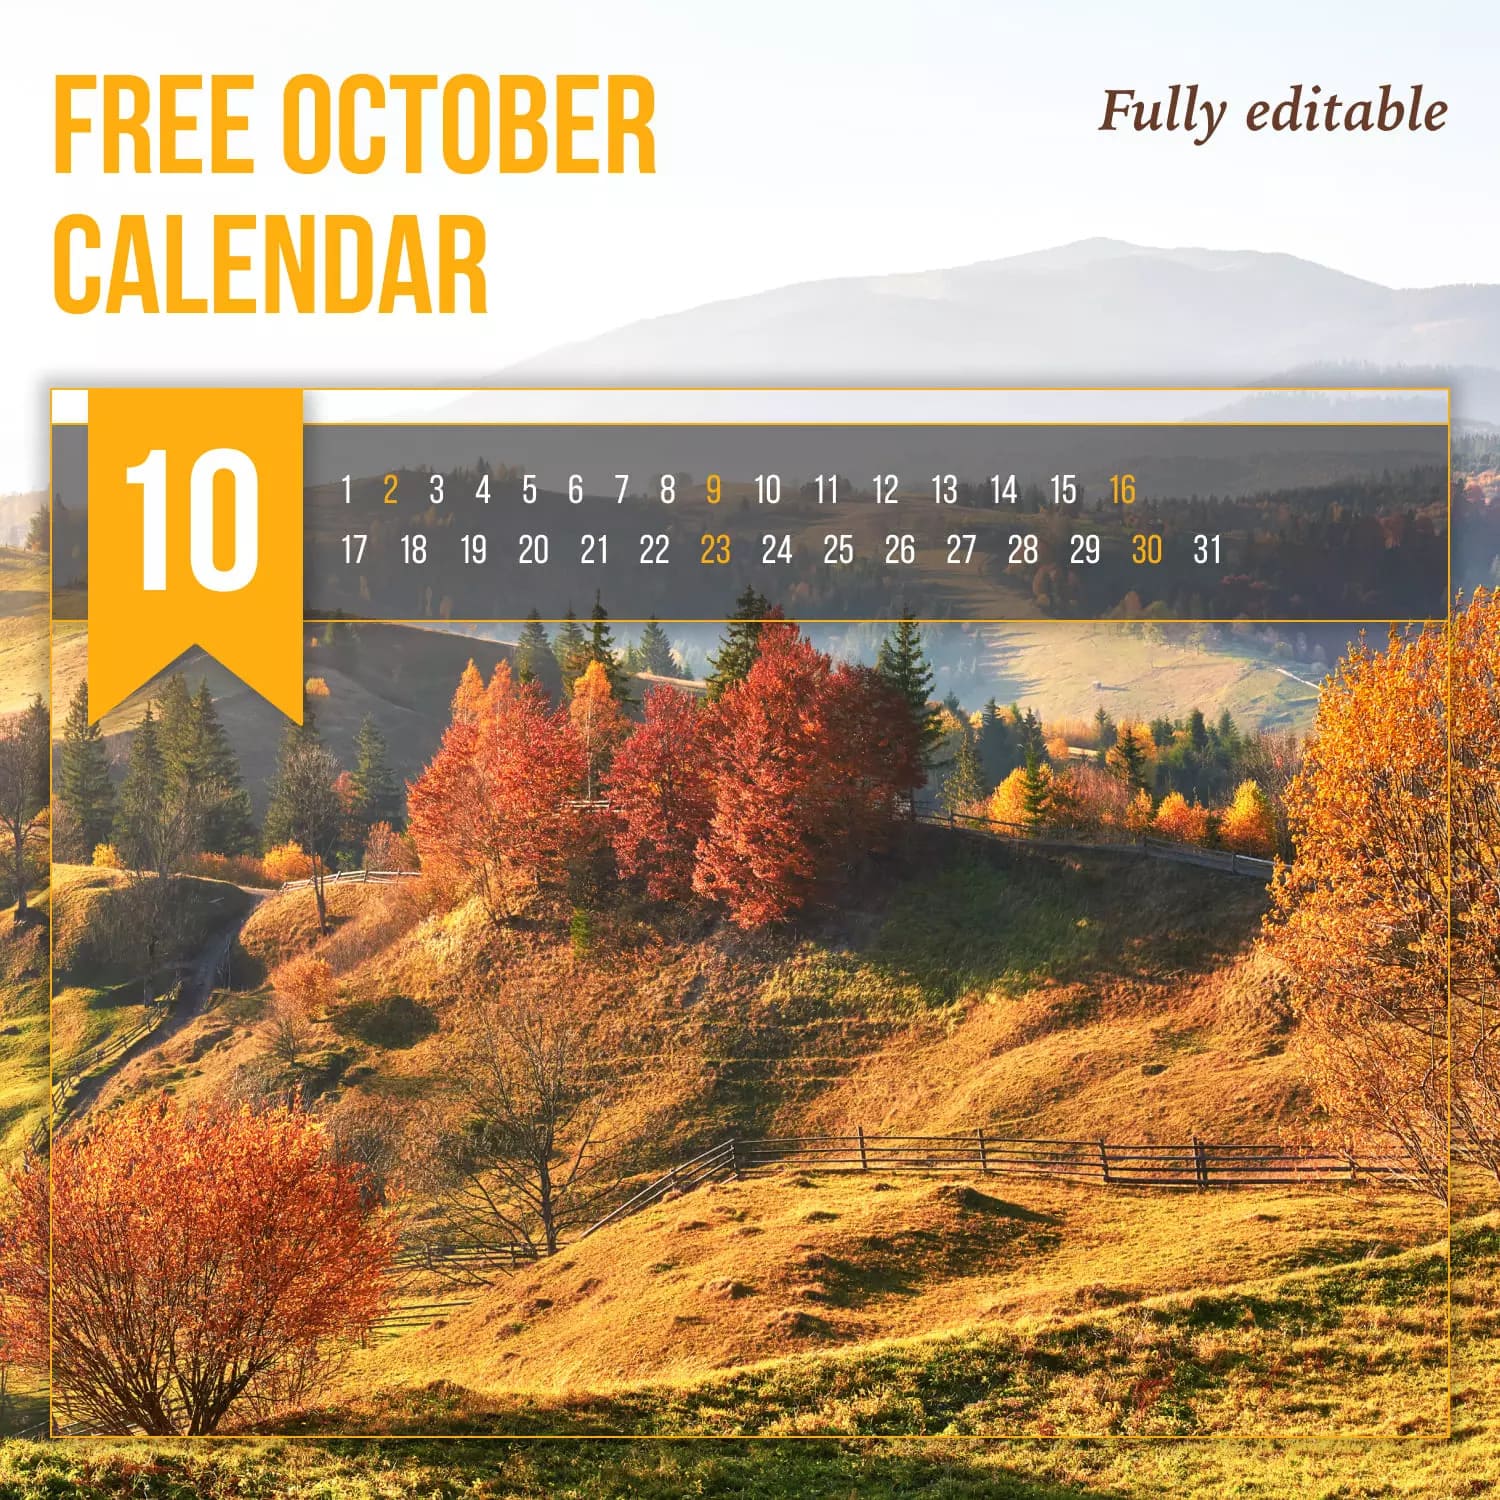 Free Editable Calendar October Nature View Preview.